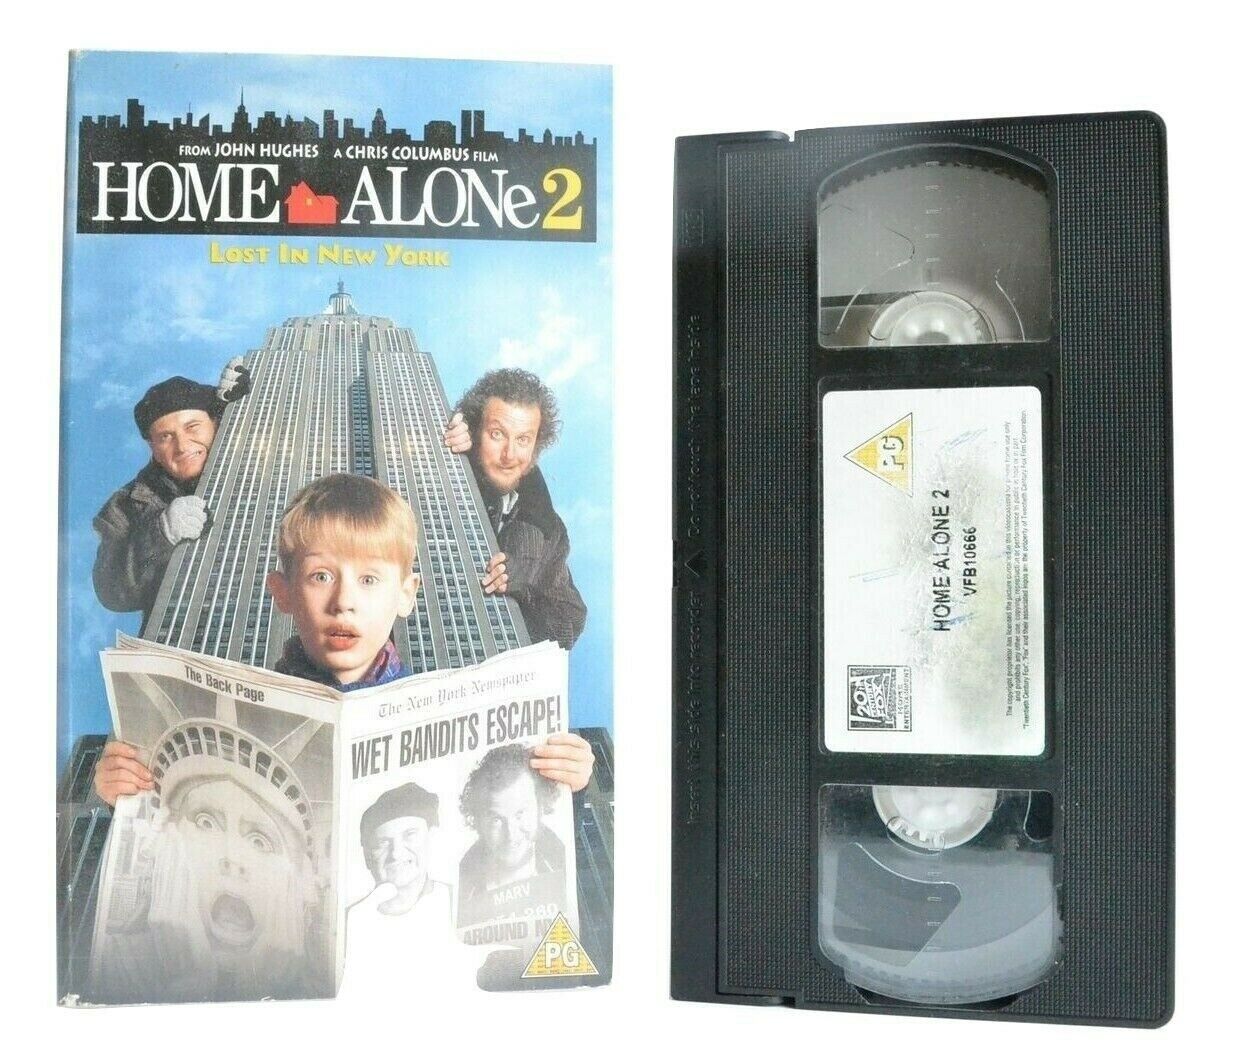 Home Alone 2: Lost In New York (1992): Christmas Comedy - Joe Pesci - Kids - VHS-